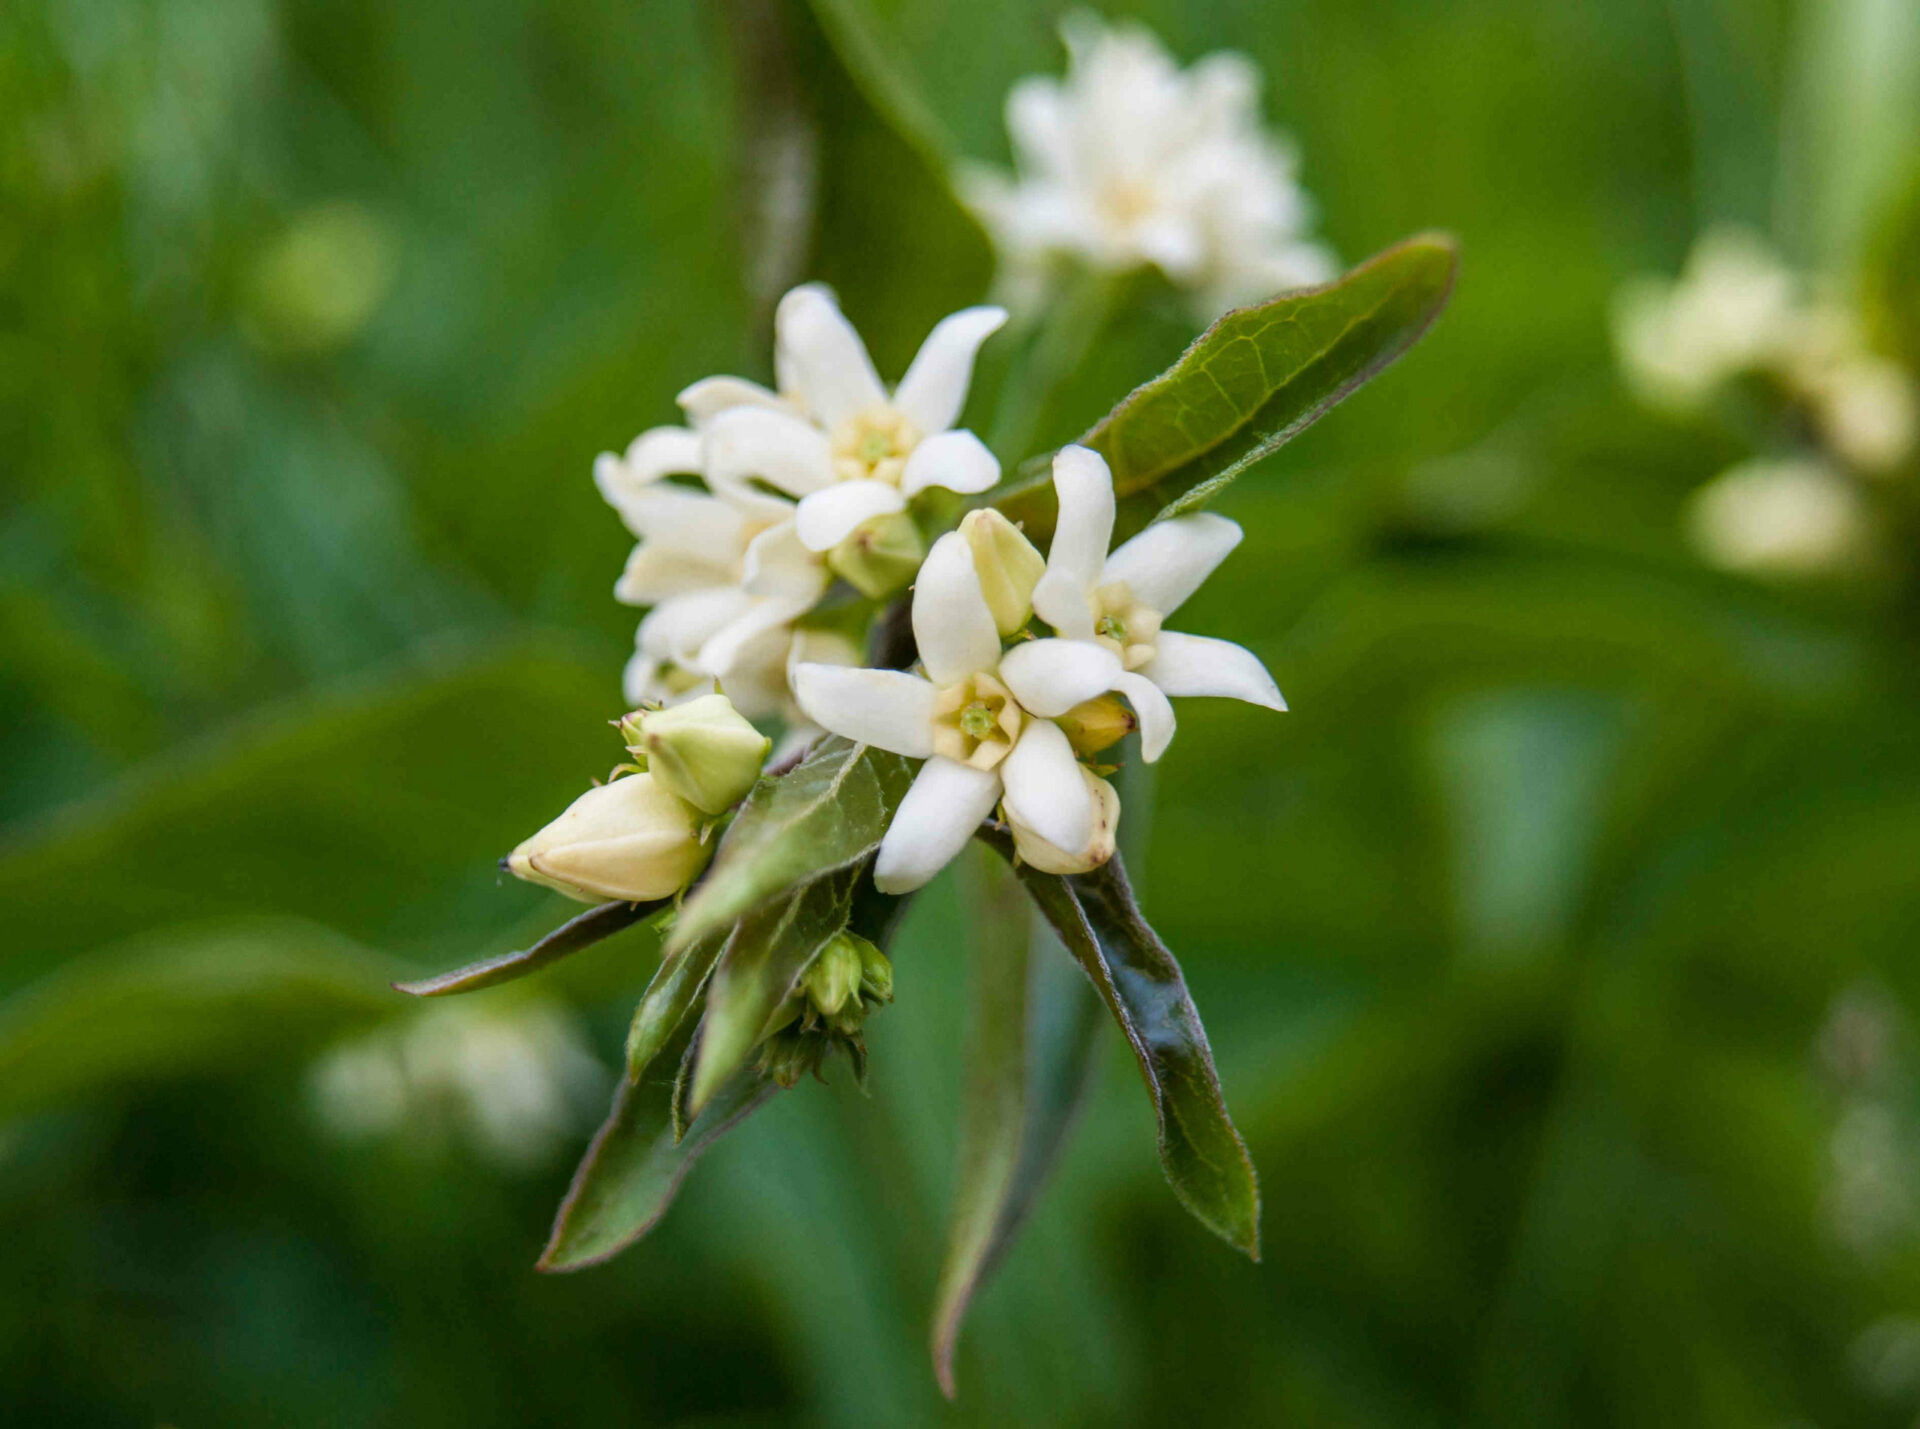 White flowers of swallowwort with dark green leaves